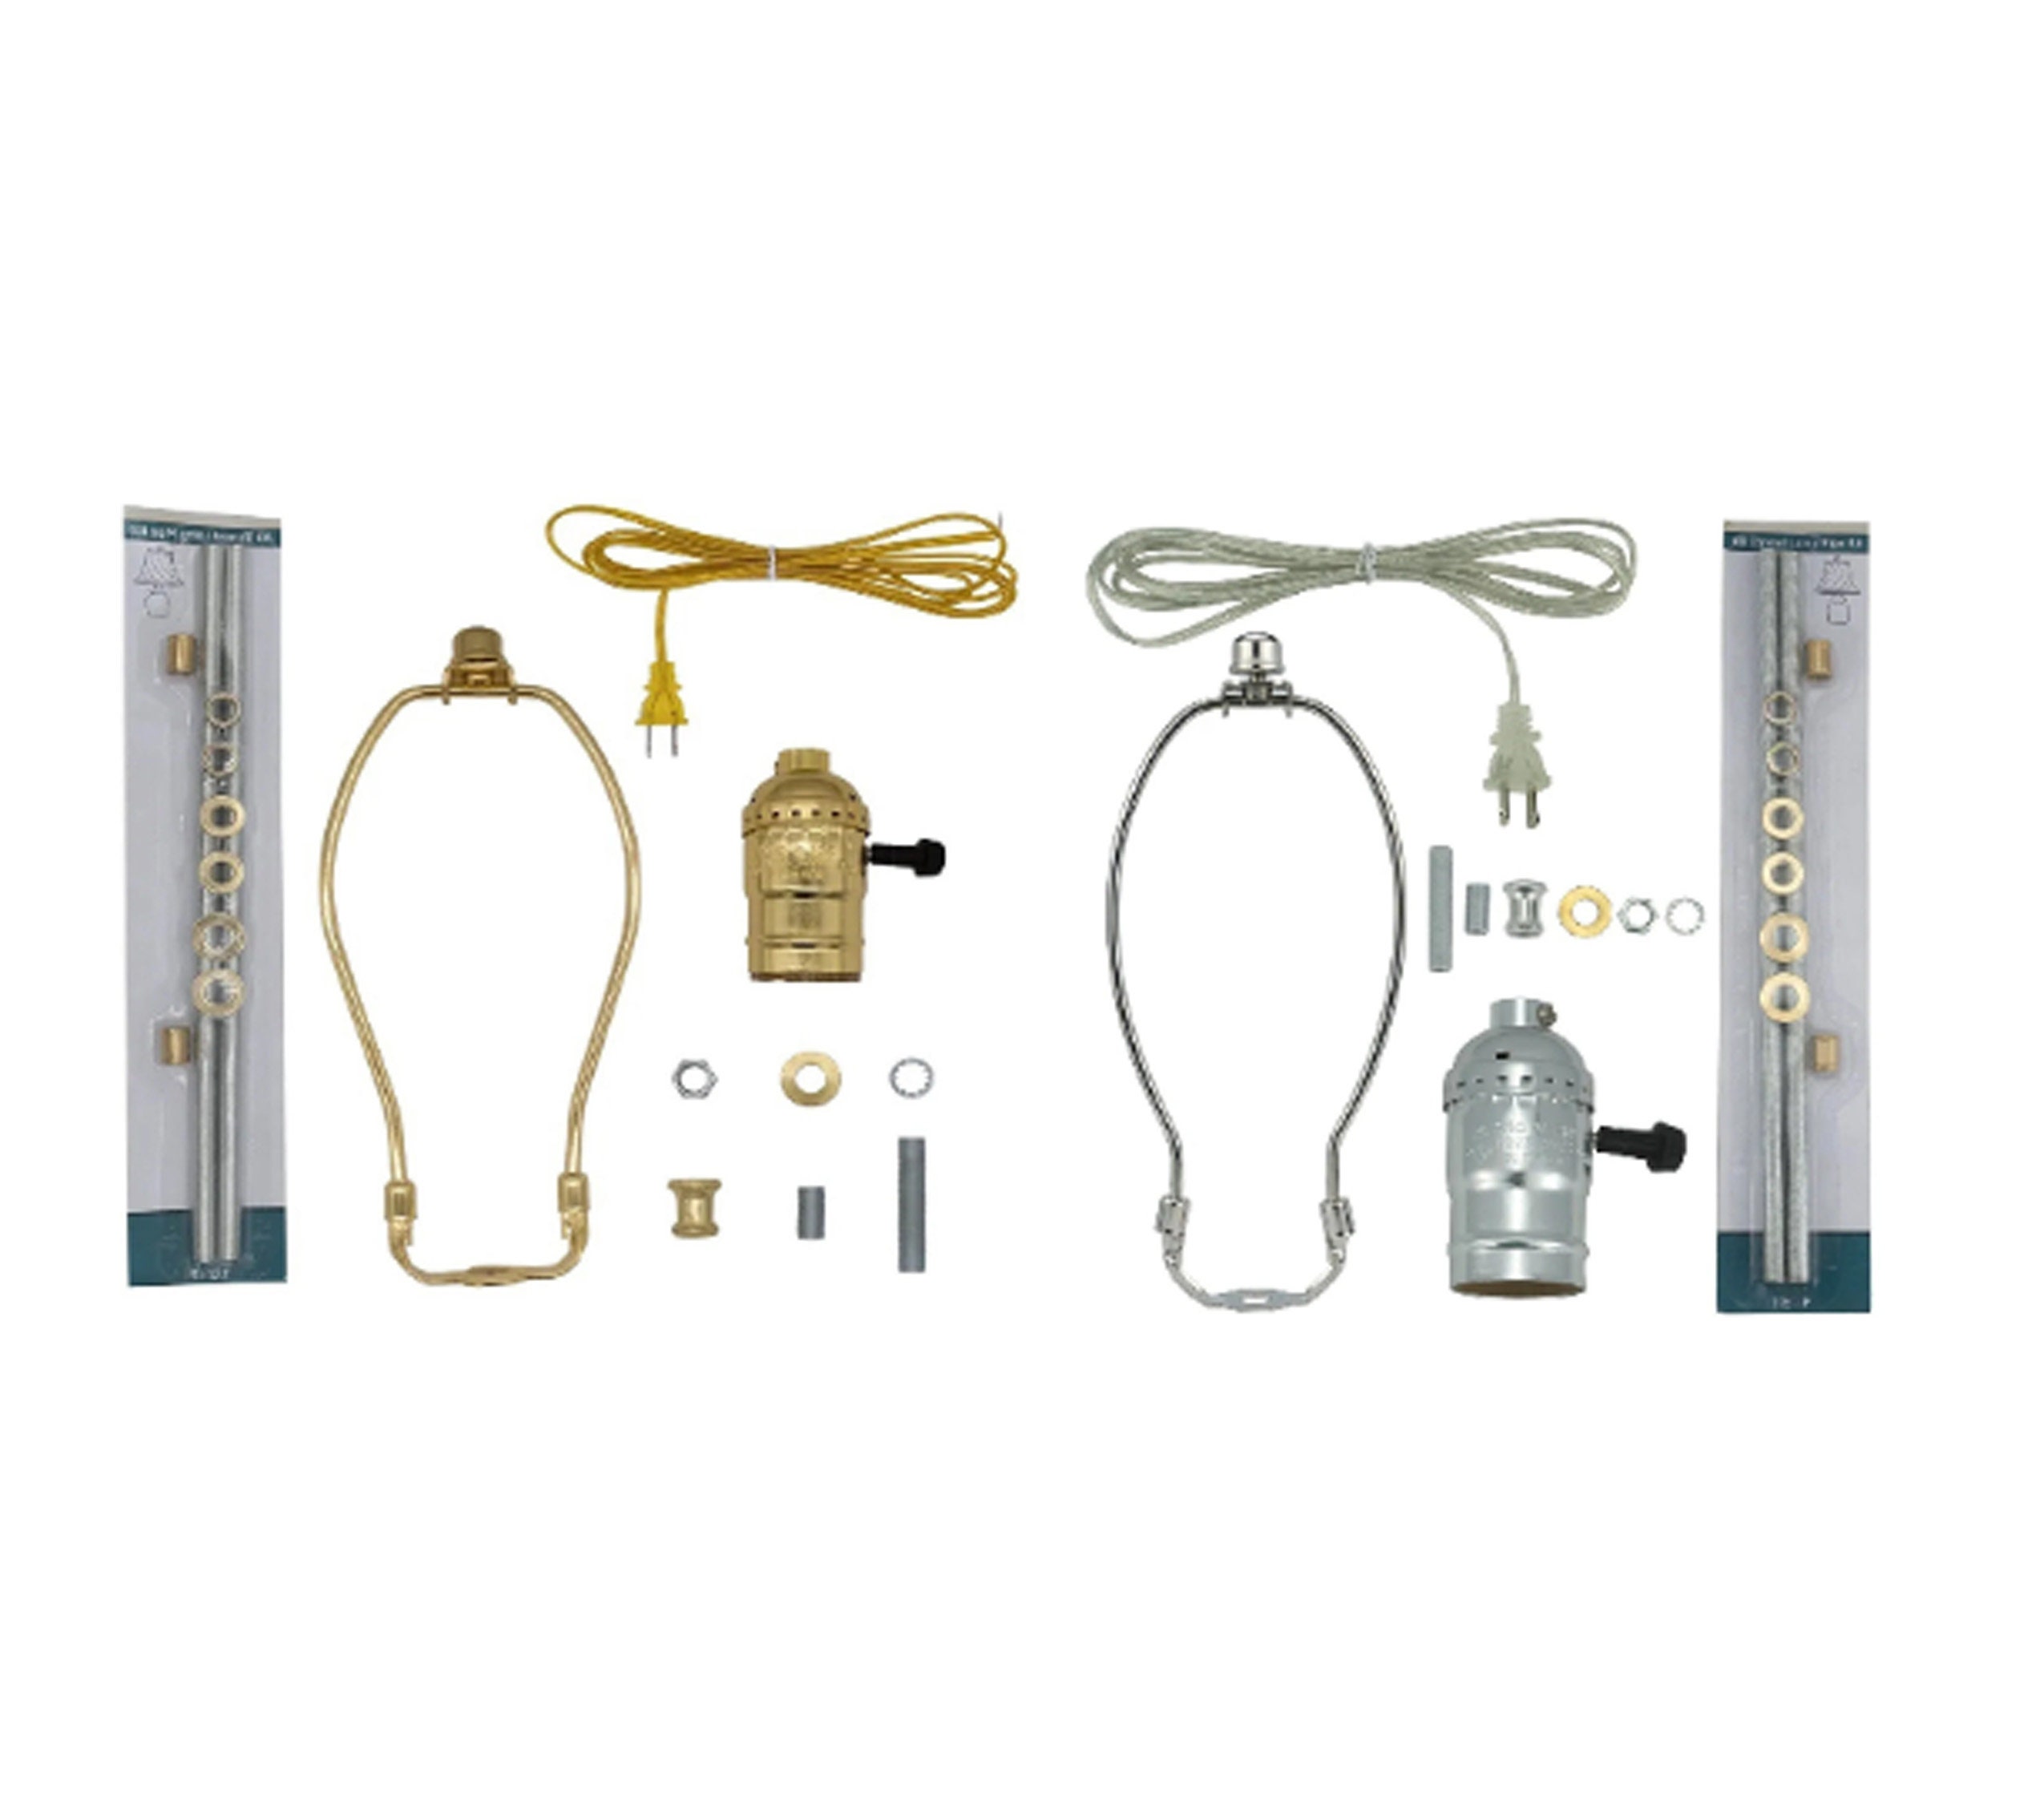 Lamp Wiring Kit-Make or Repair Old Lamps-Rewire a Vintage Lamp or Create a  Custom Light Fixture with Lamp Making Kit-Antique Brass Socket Set-12 Foot